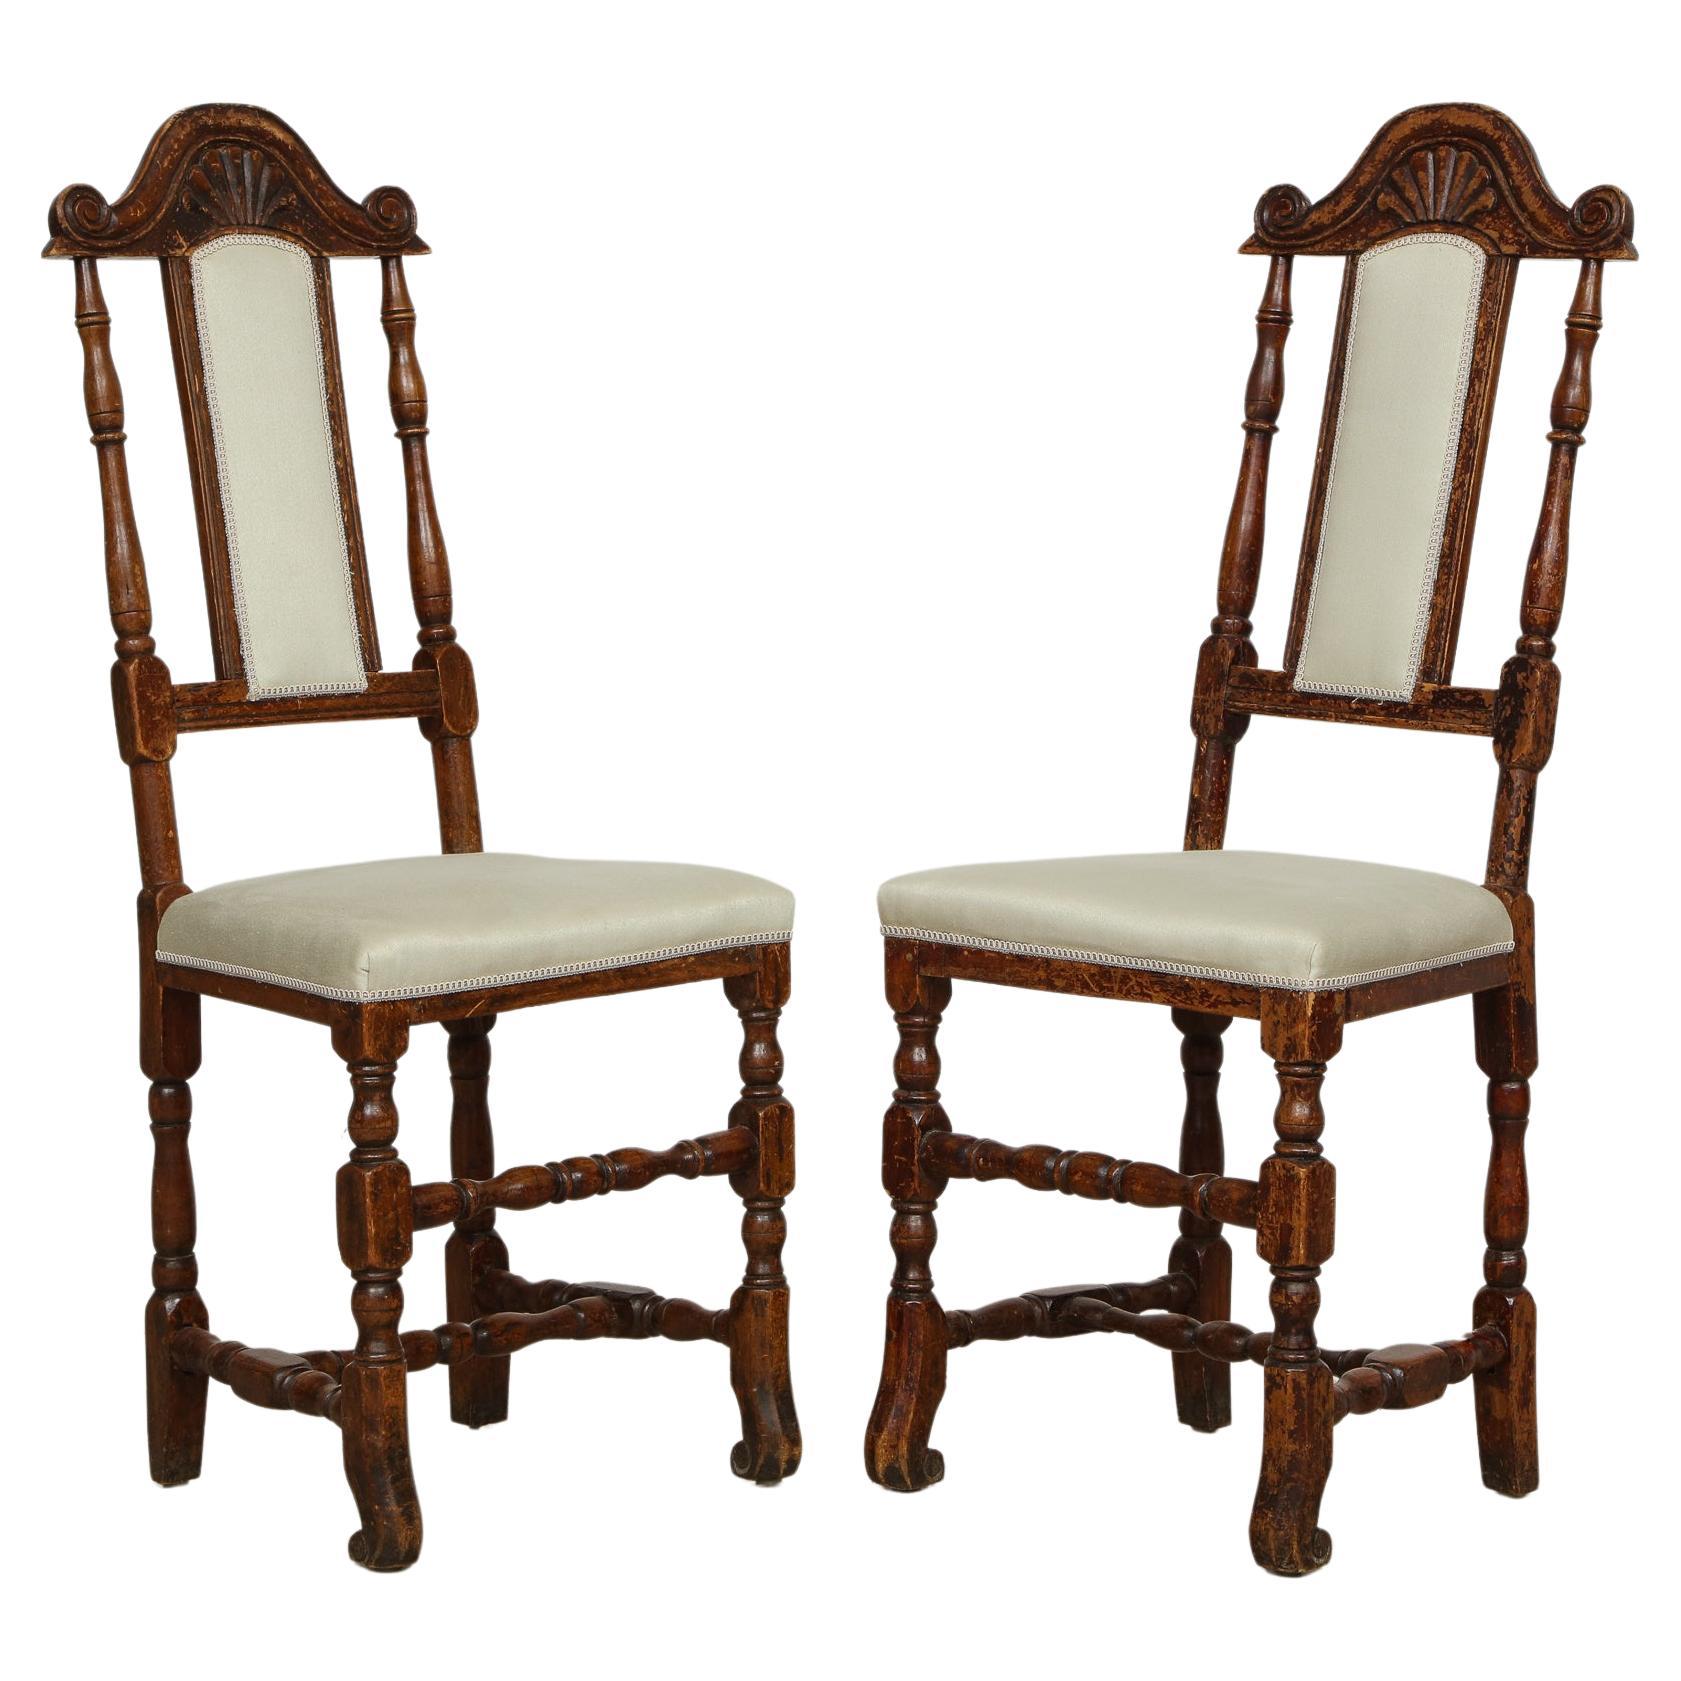 Pair of Late Baroque Swedish Chairs, Origin, Sweden, Circa 1750-1760 For Sale